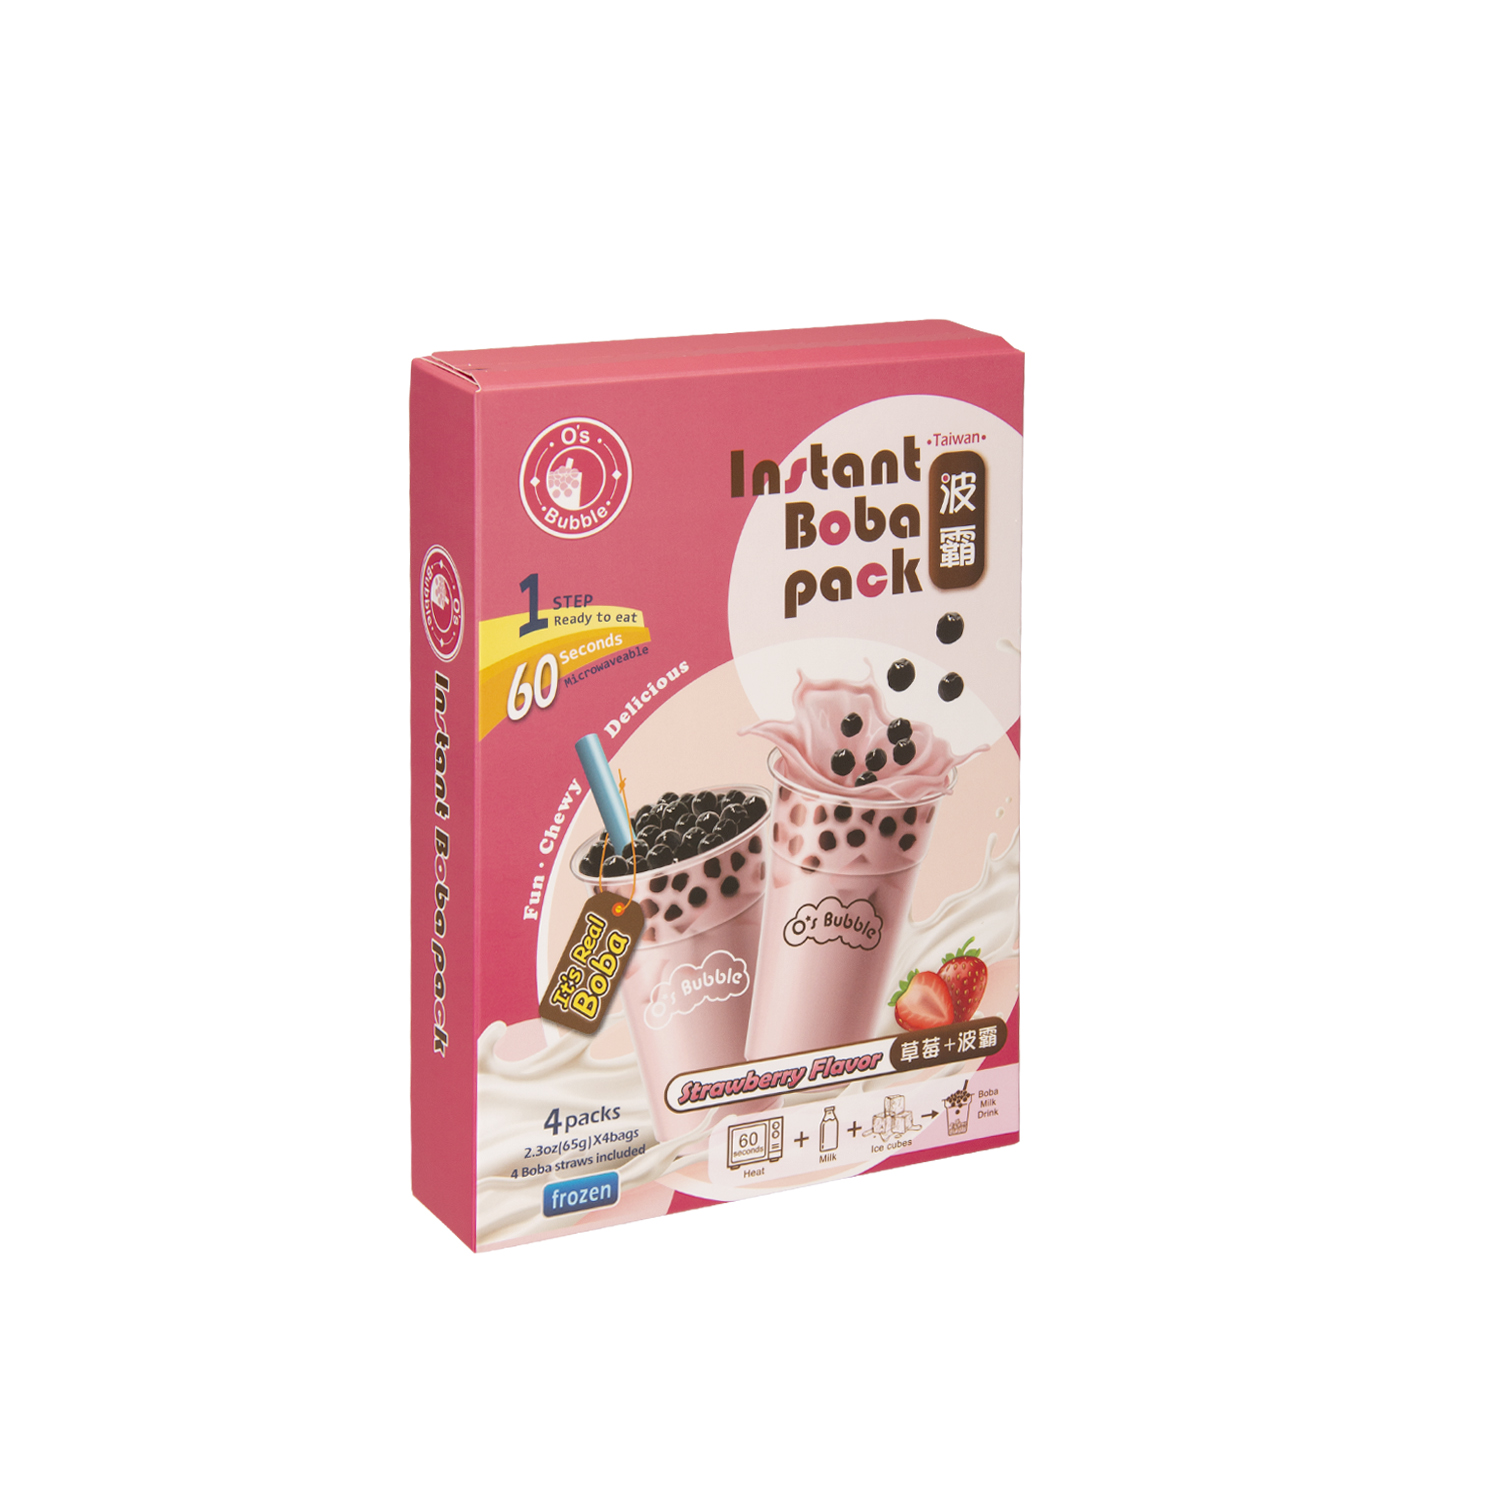 https://www.osbubble.com/wp-content/uploads/2019/10/20220617_instant_boba_pack_front_strawberry.jpg